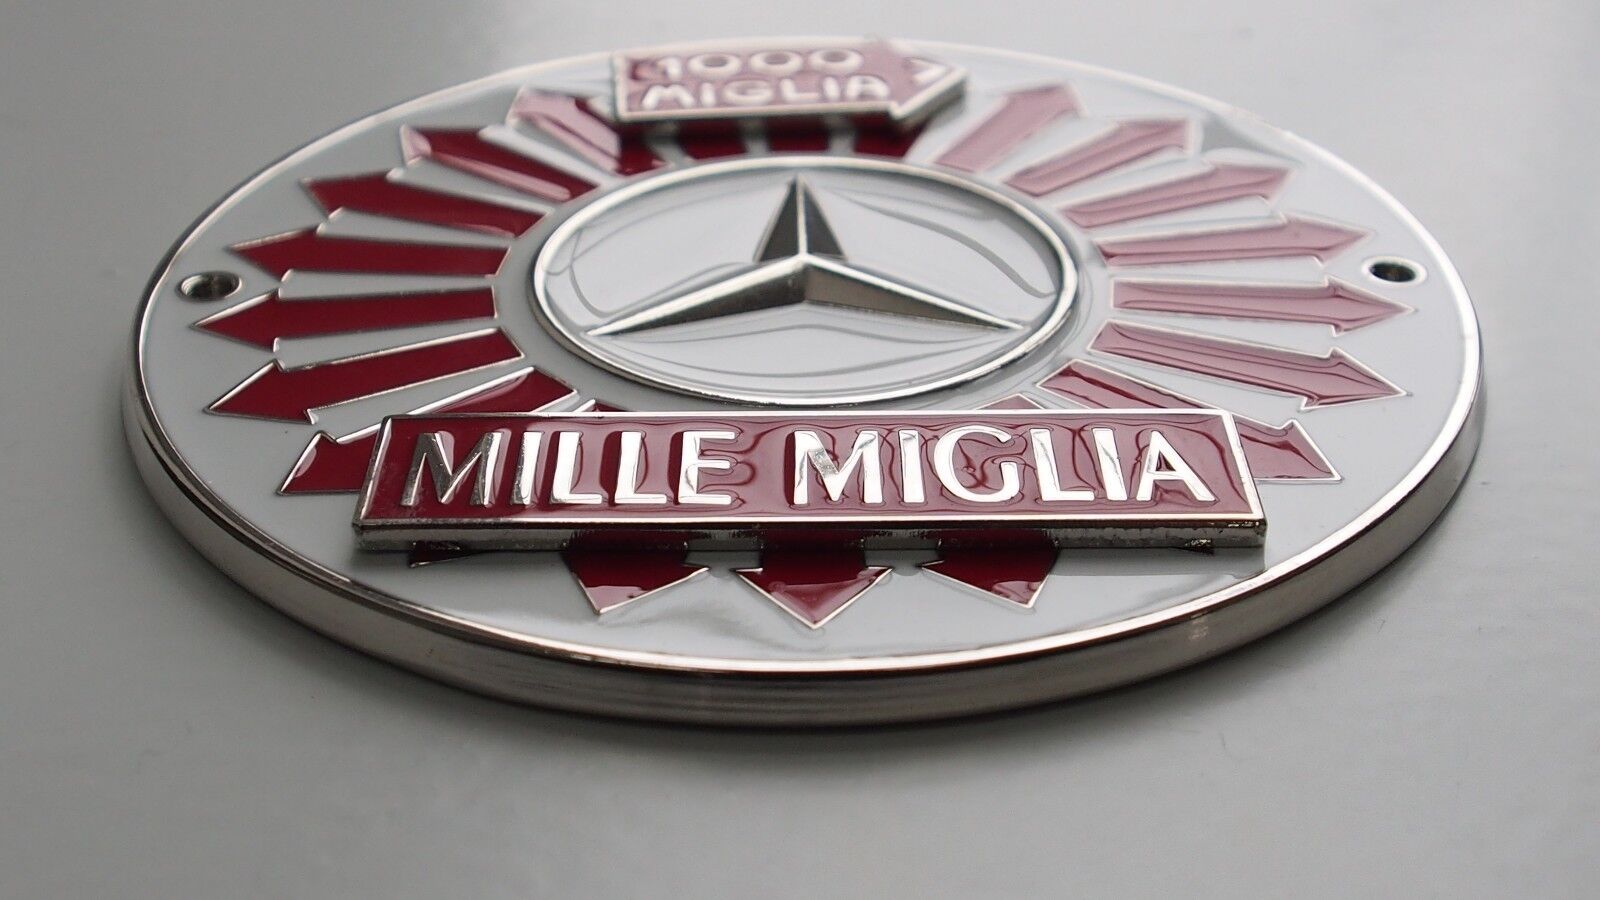 Mille Miglia classic Car Grill badge emblem badge for Mercedes grill badge